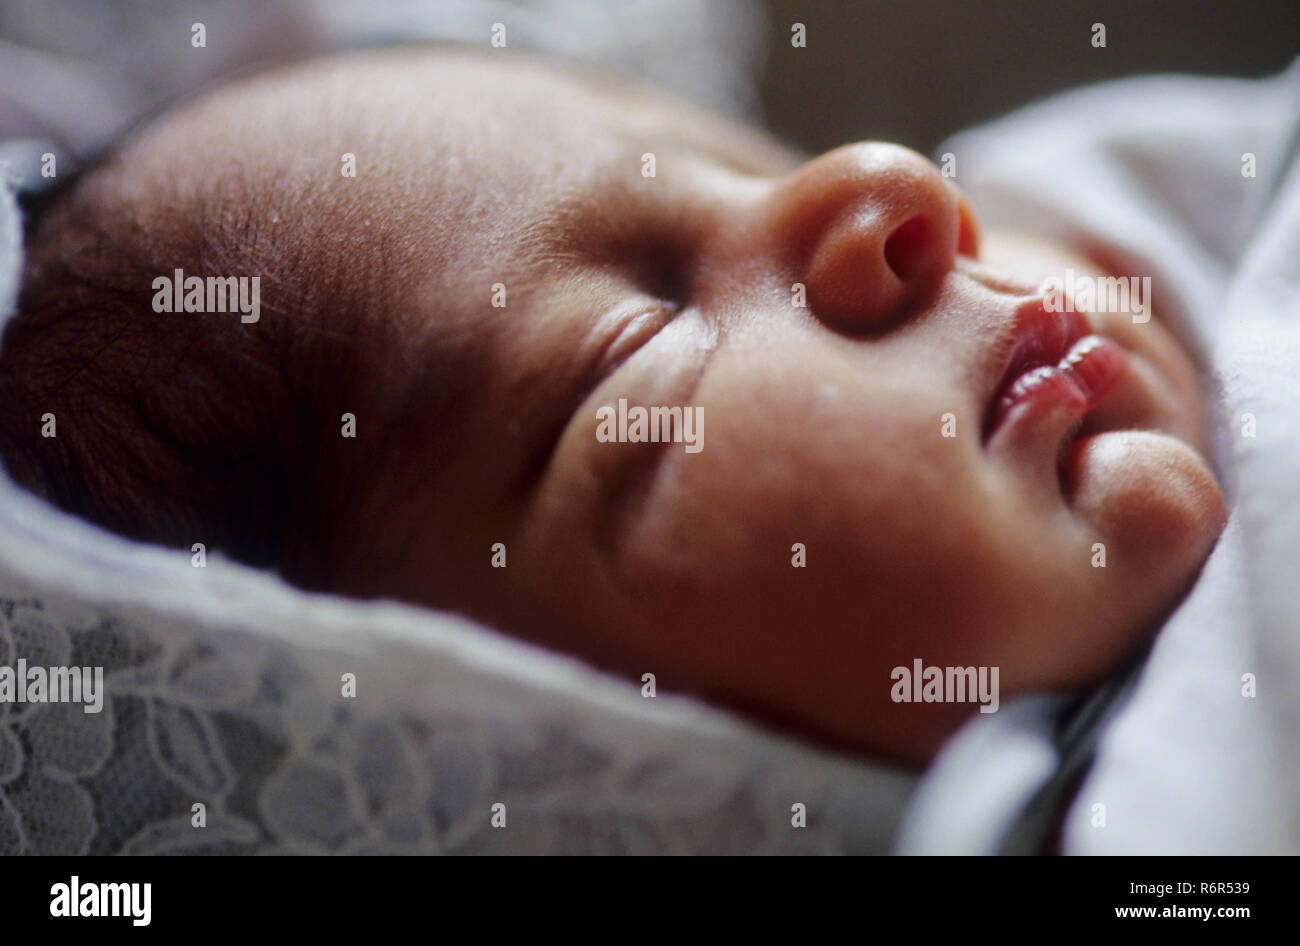 Child, New born, male one day old, india Stock Photo